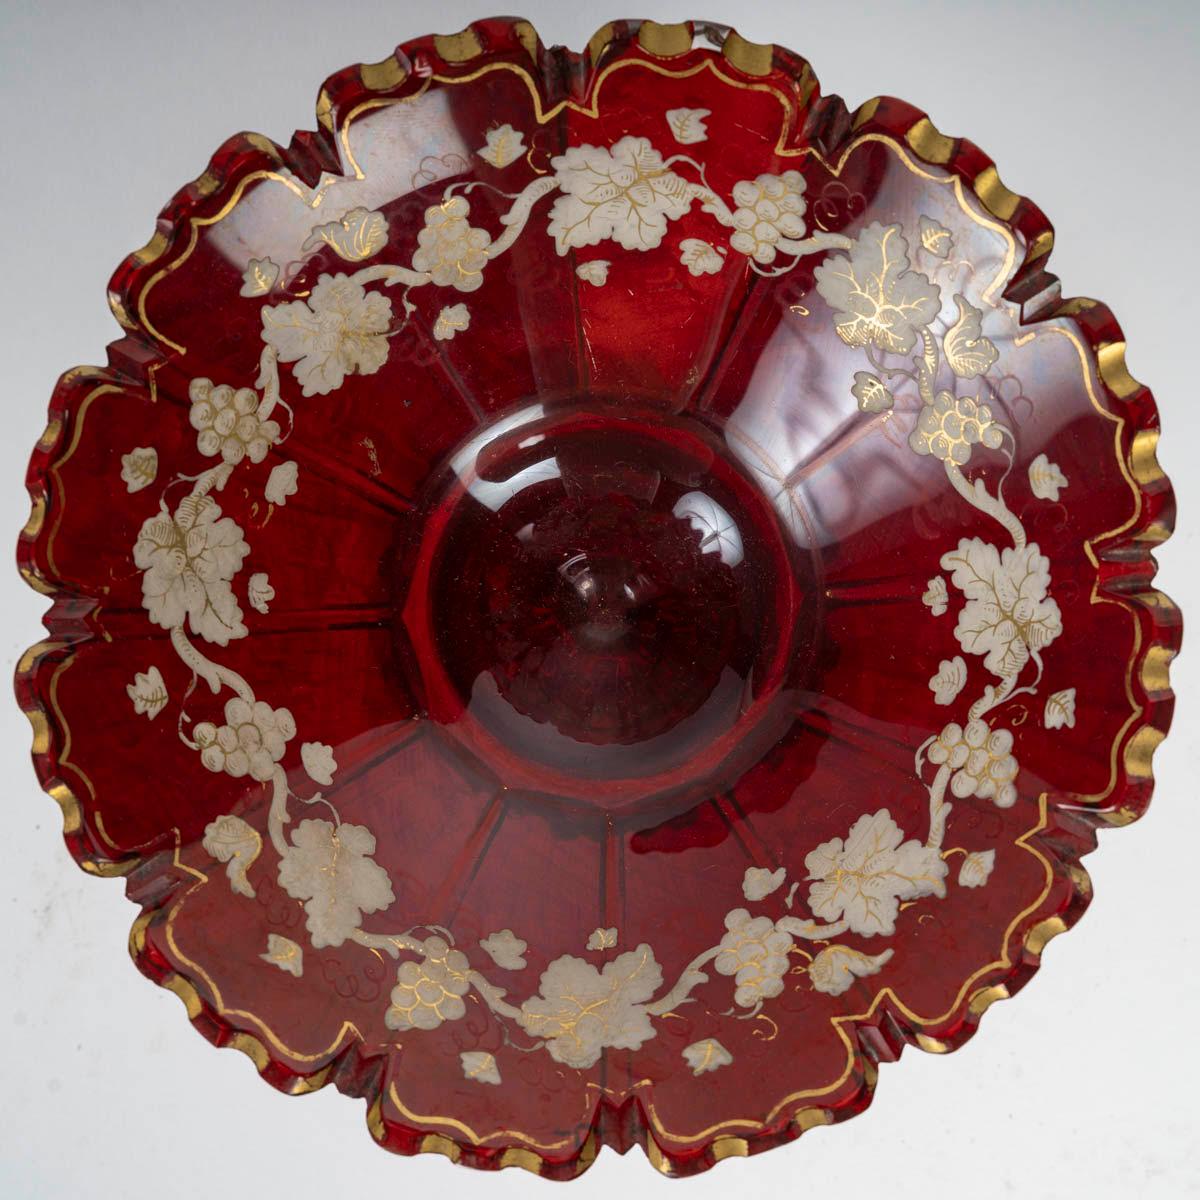 French Bohemian Red Enamelled Crystal Bowl, 19th Century, Napoleon III Period.